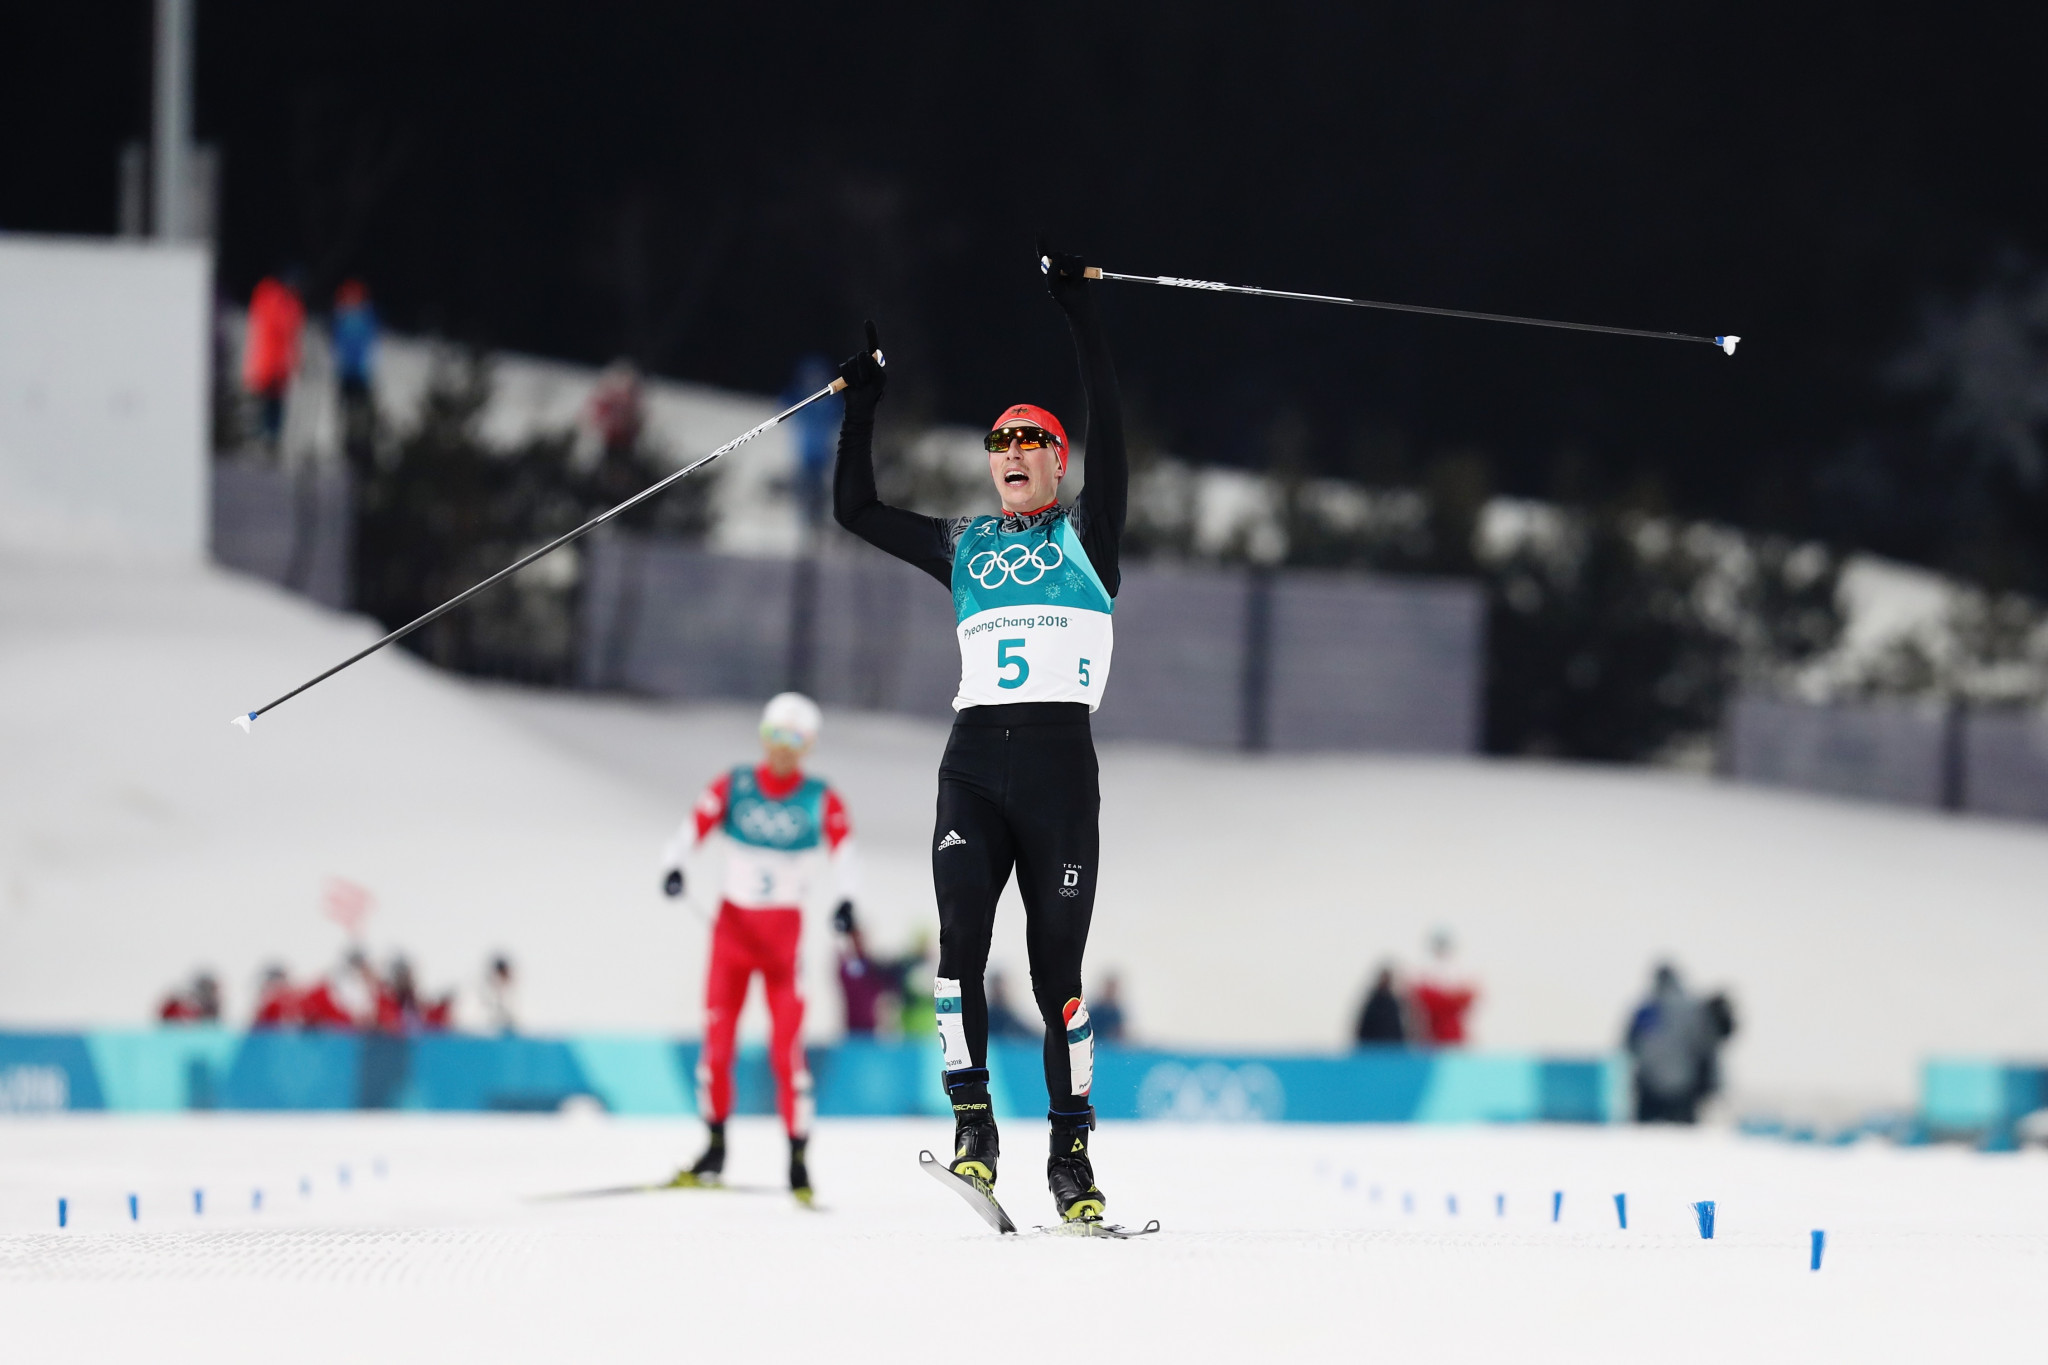 Germany’s Eric Frenzel retained his Nordic Combined Olympic title today after coming out on top in the individual Gundersen normal hill/10 kilometres event at Pyeongchang 2018 ©Getty Images